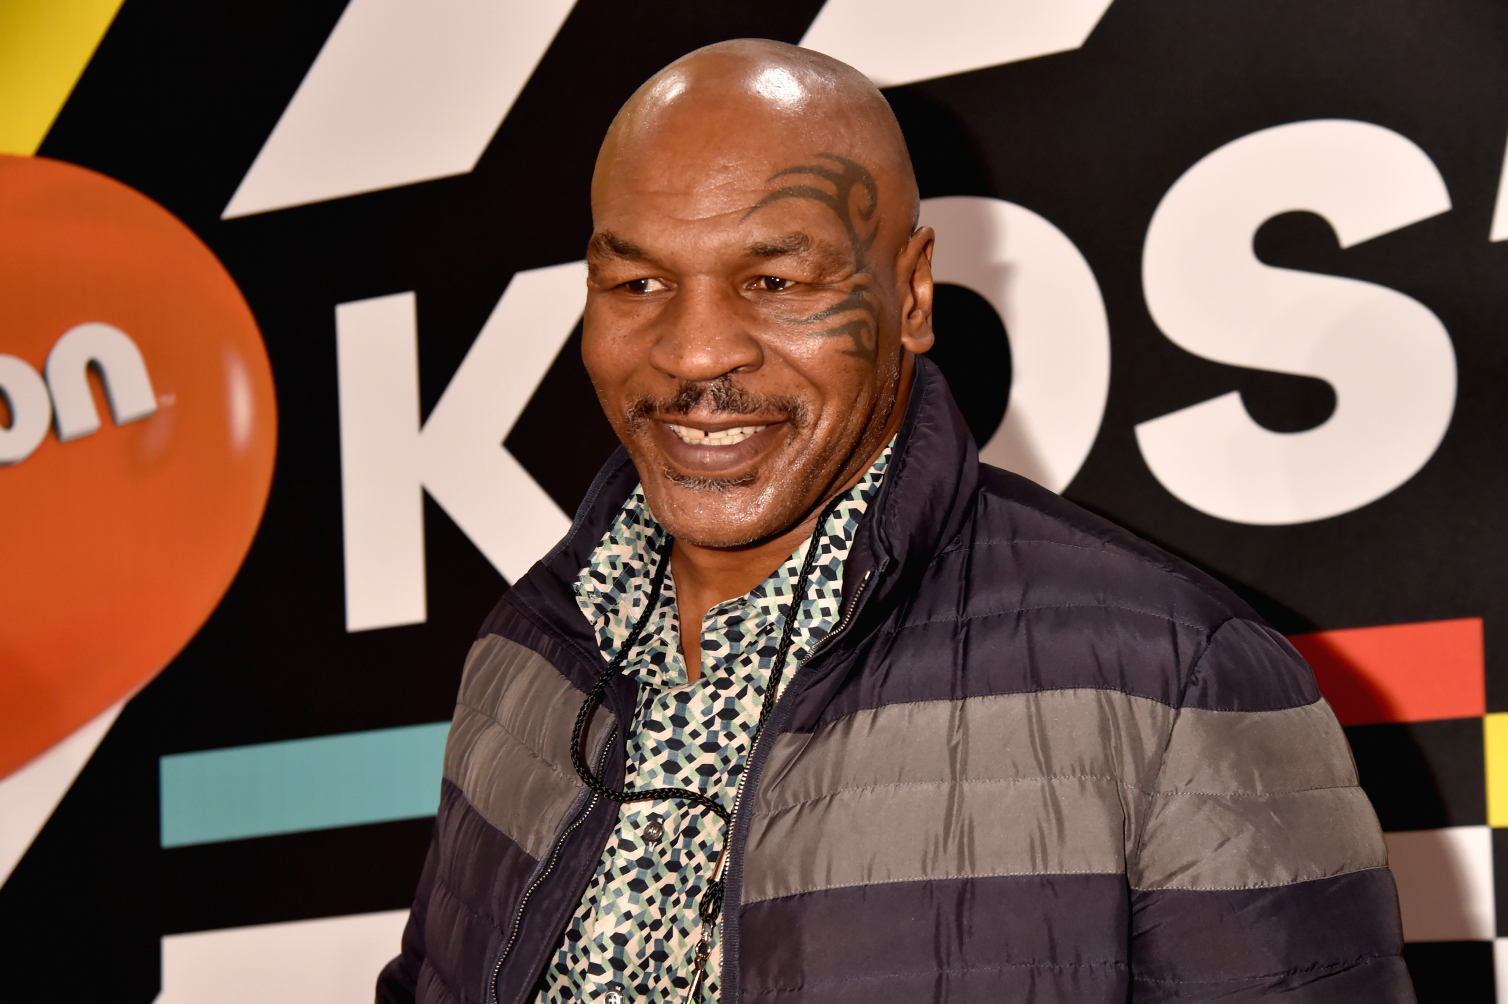 Mike Tyson said that life has beaten him up.